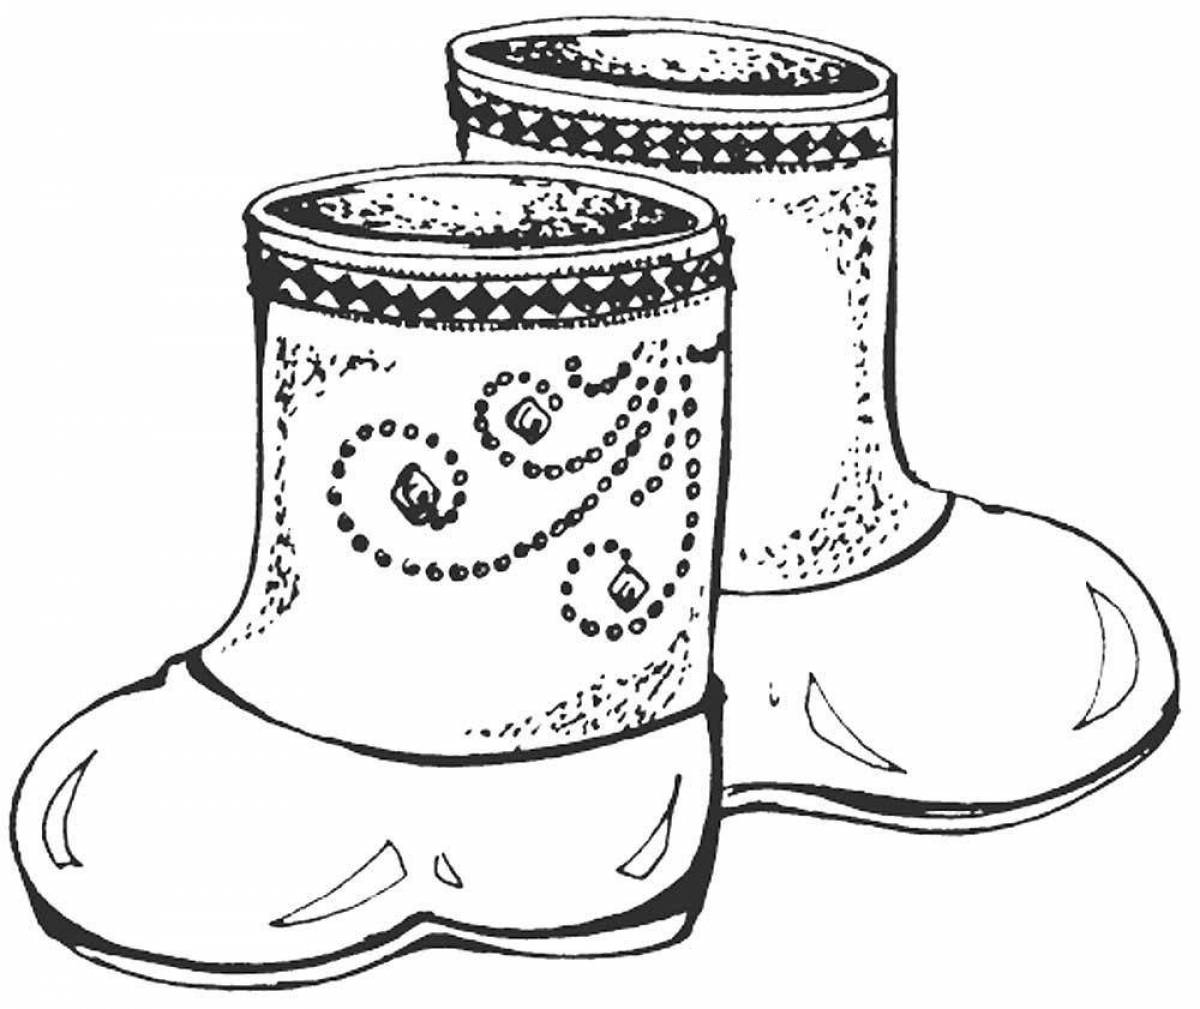 Fabulous boots coloring book for kids